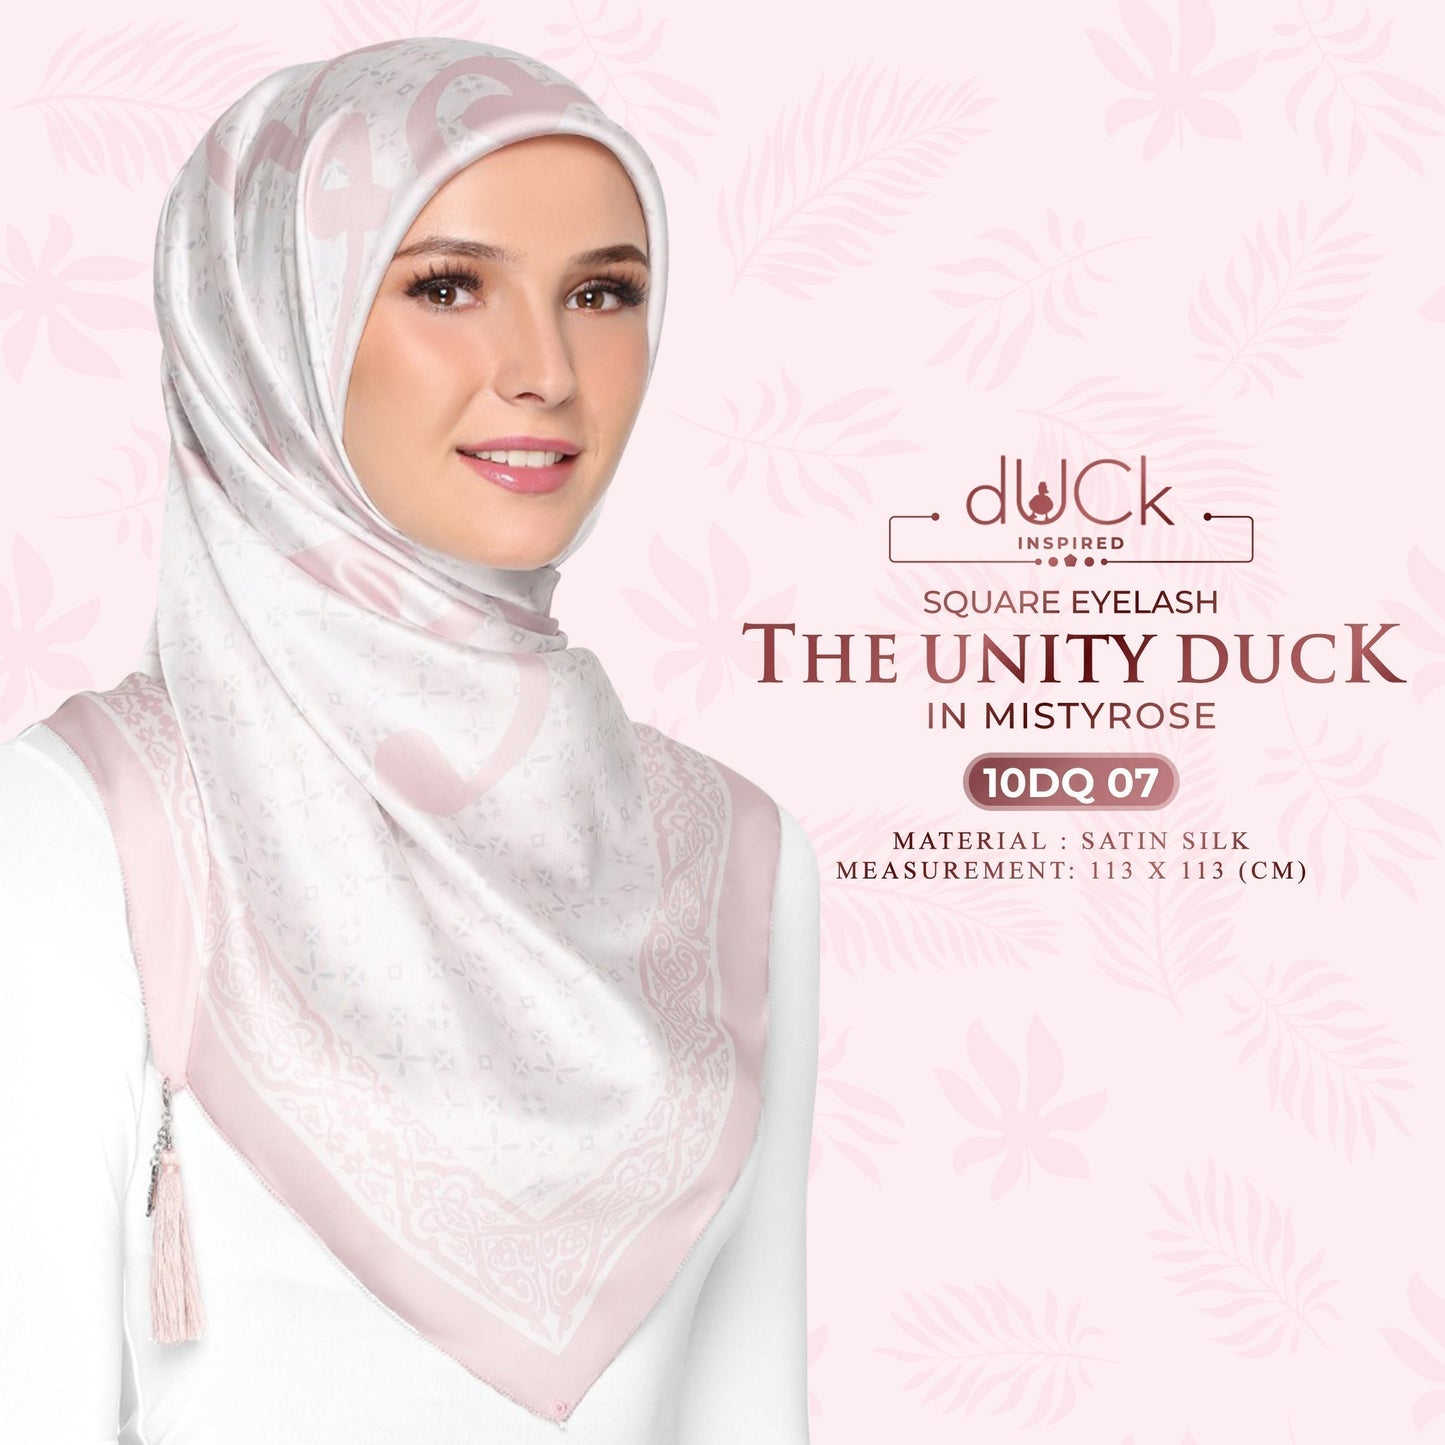 The dUCk Unity Square Eyelash Collection RM14